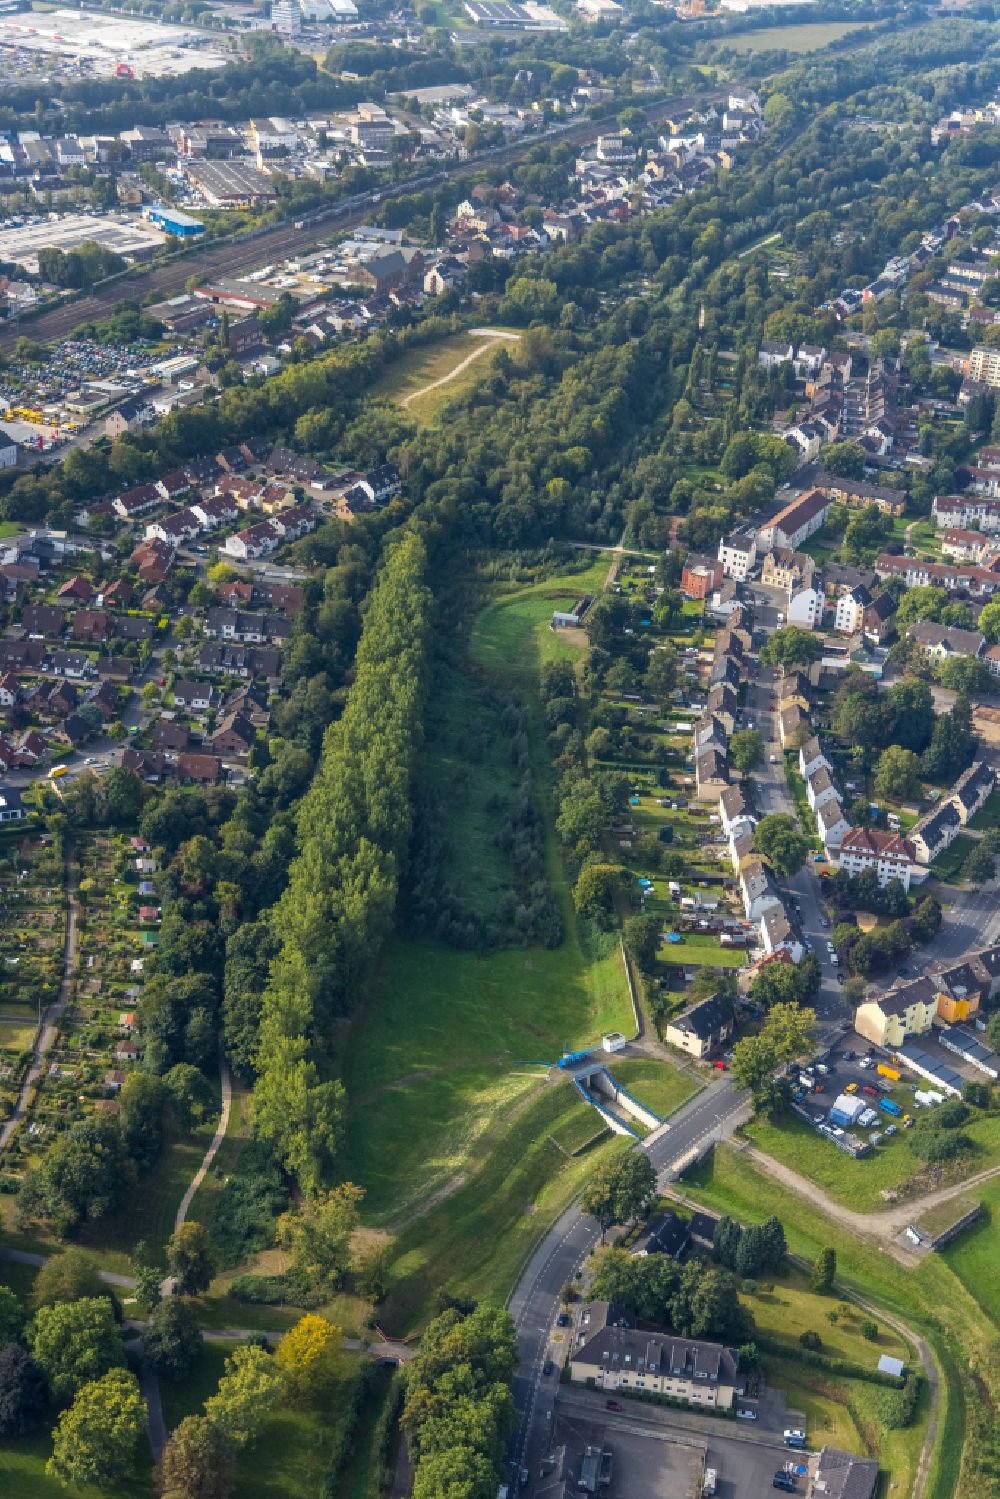 Dortmund from above - Green grassy areas with trees on the butterfly stream in the district of Marten in Dortmund in the Ruhr area in the state North Rhine-Westphalia, Germany